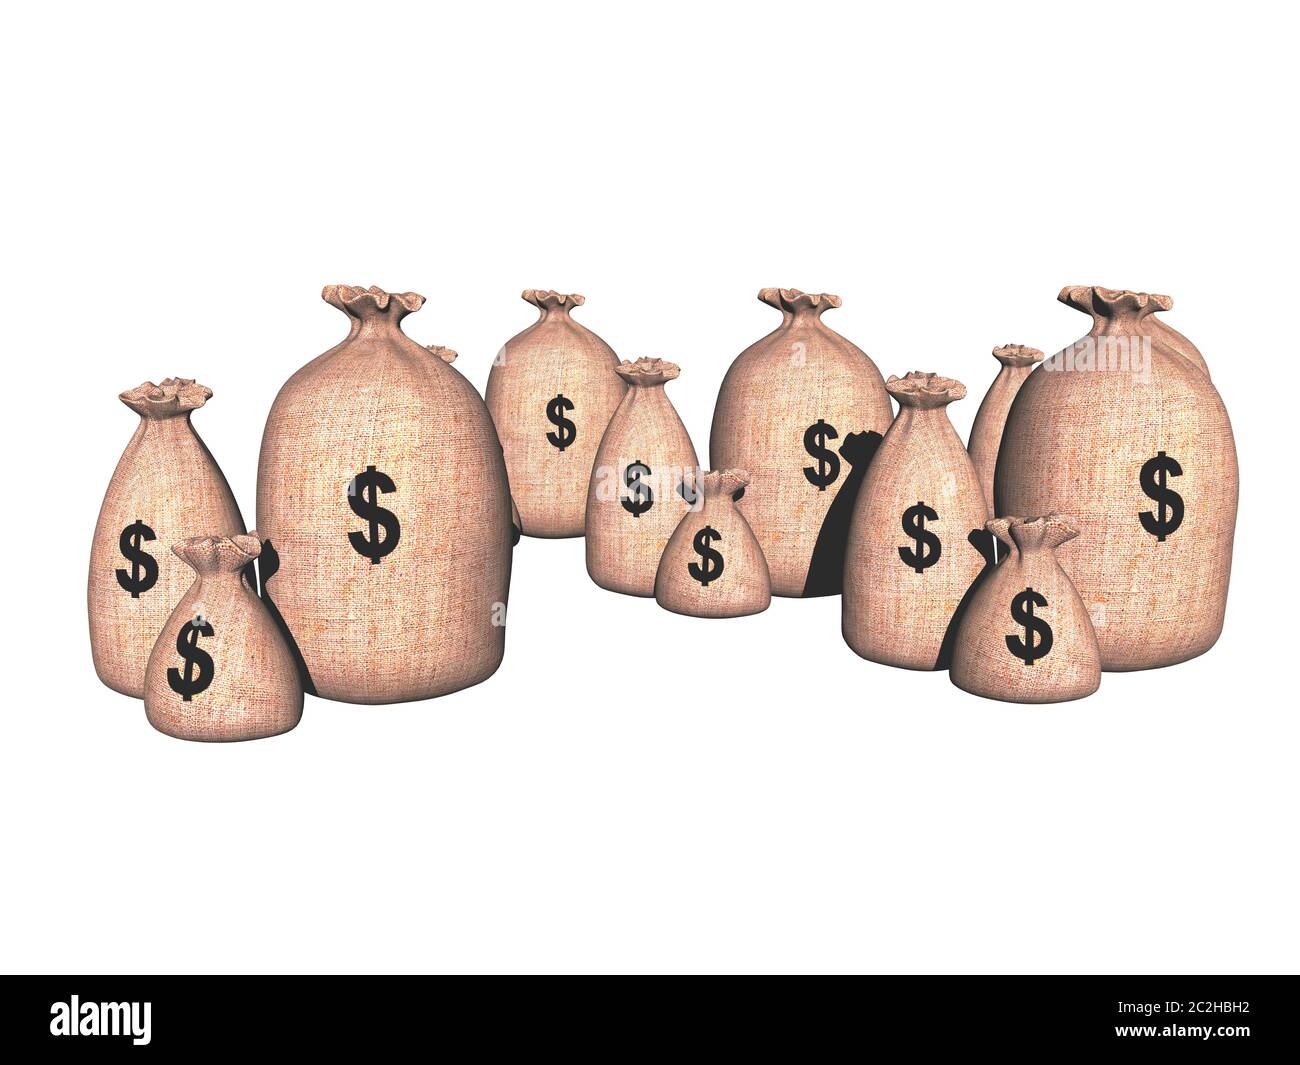 Money bags made of jute in different currencies Stock Photo